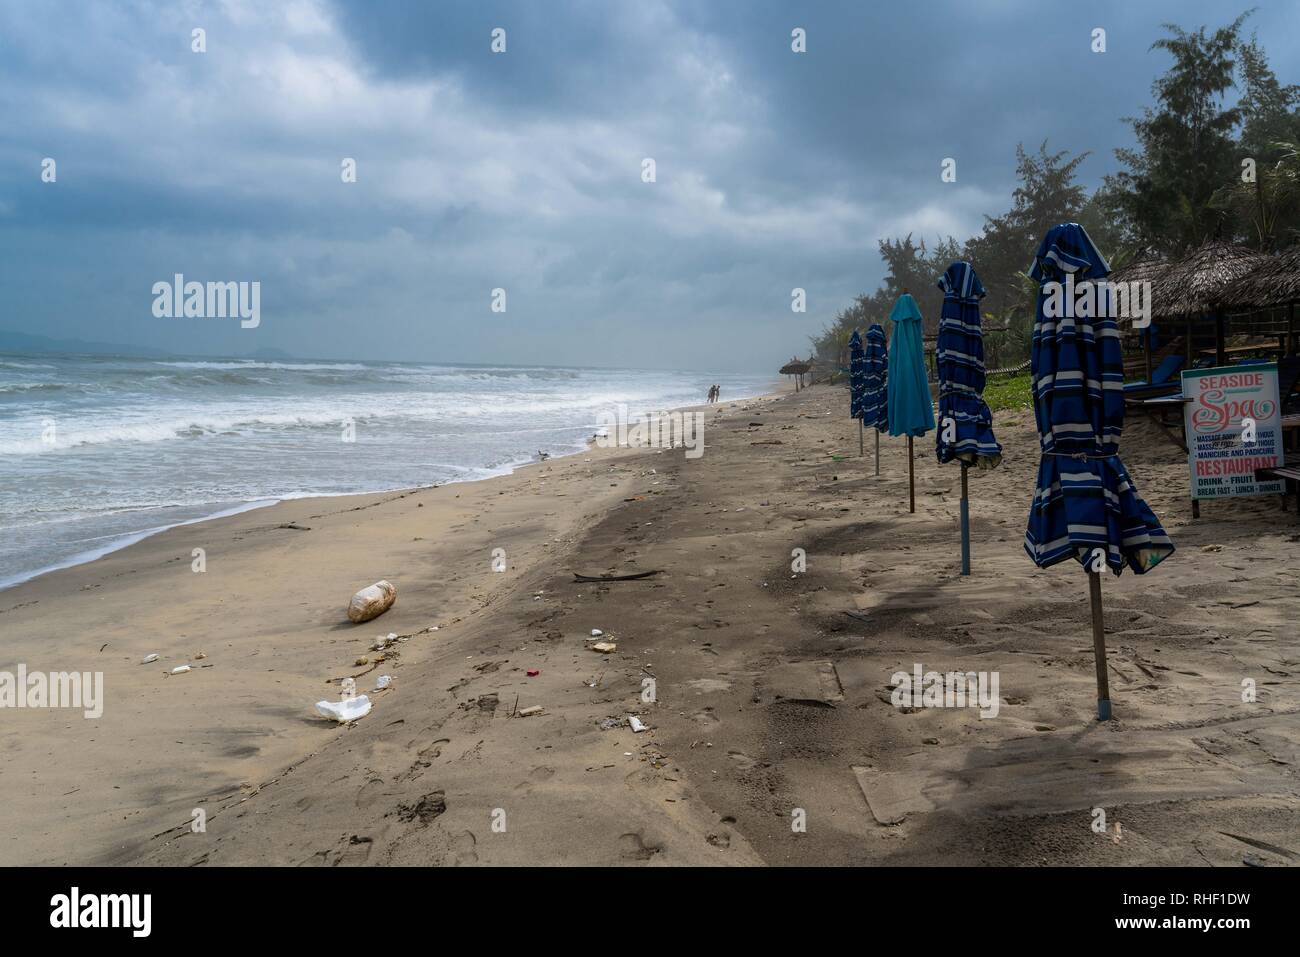 Polution at the famous angbang beach in Hue, Vietnam. Off season in winter. Stock Photo